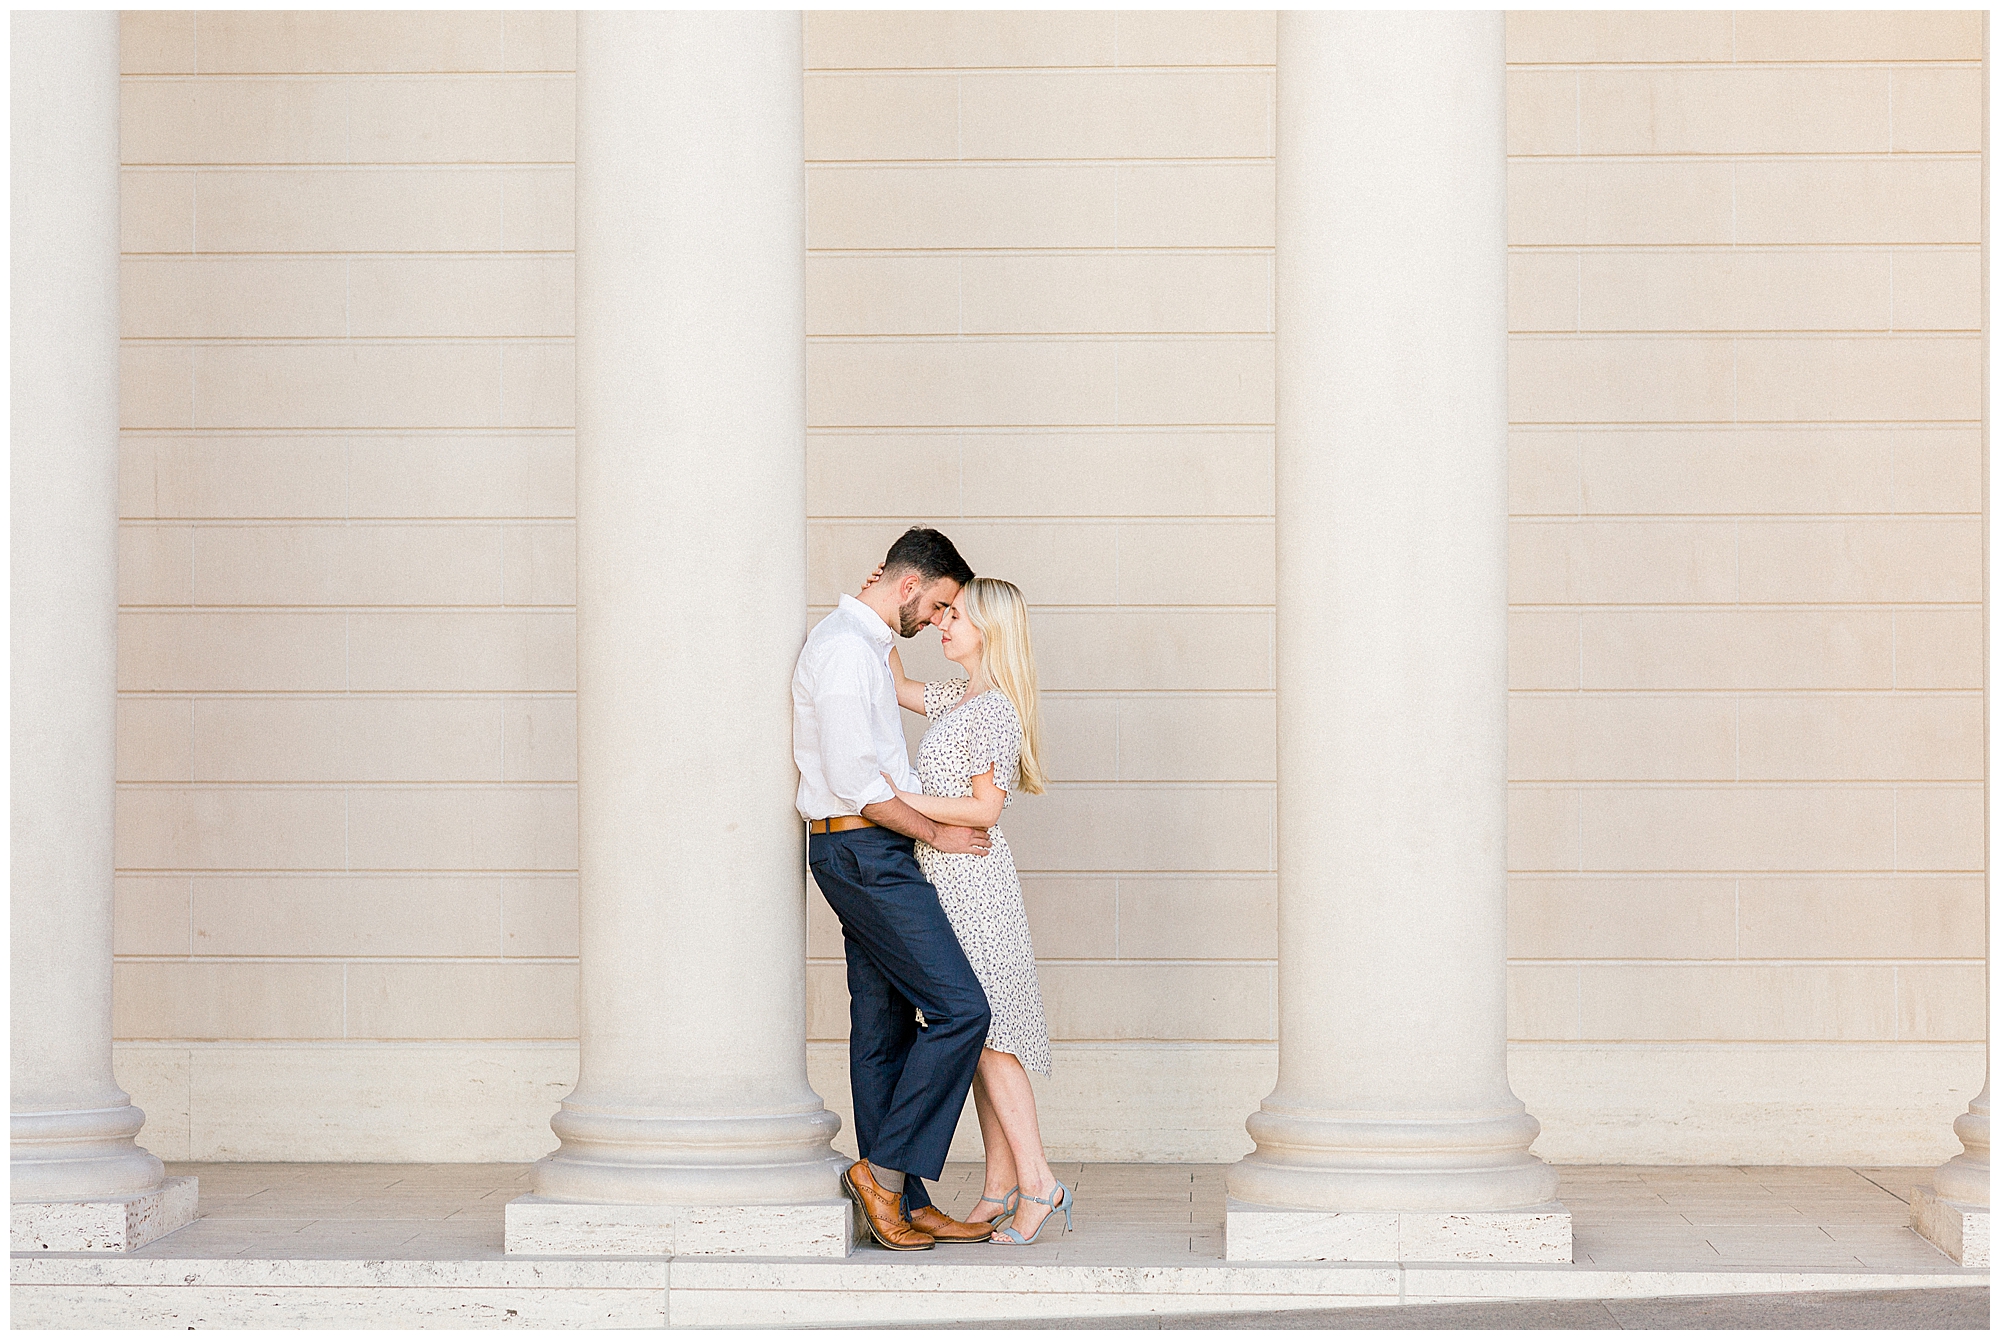 Our Very Own San Francisco Anniversary Session Birmingham Alabama Wedding Photographers Anniversary letter to my husband